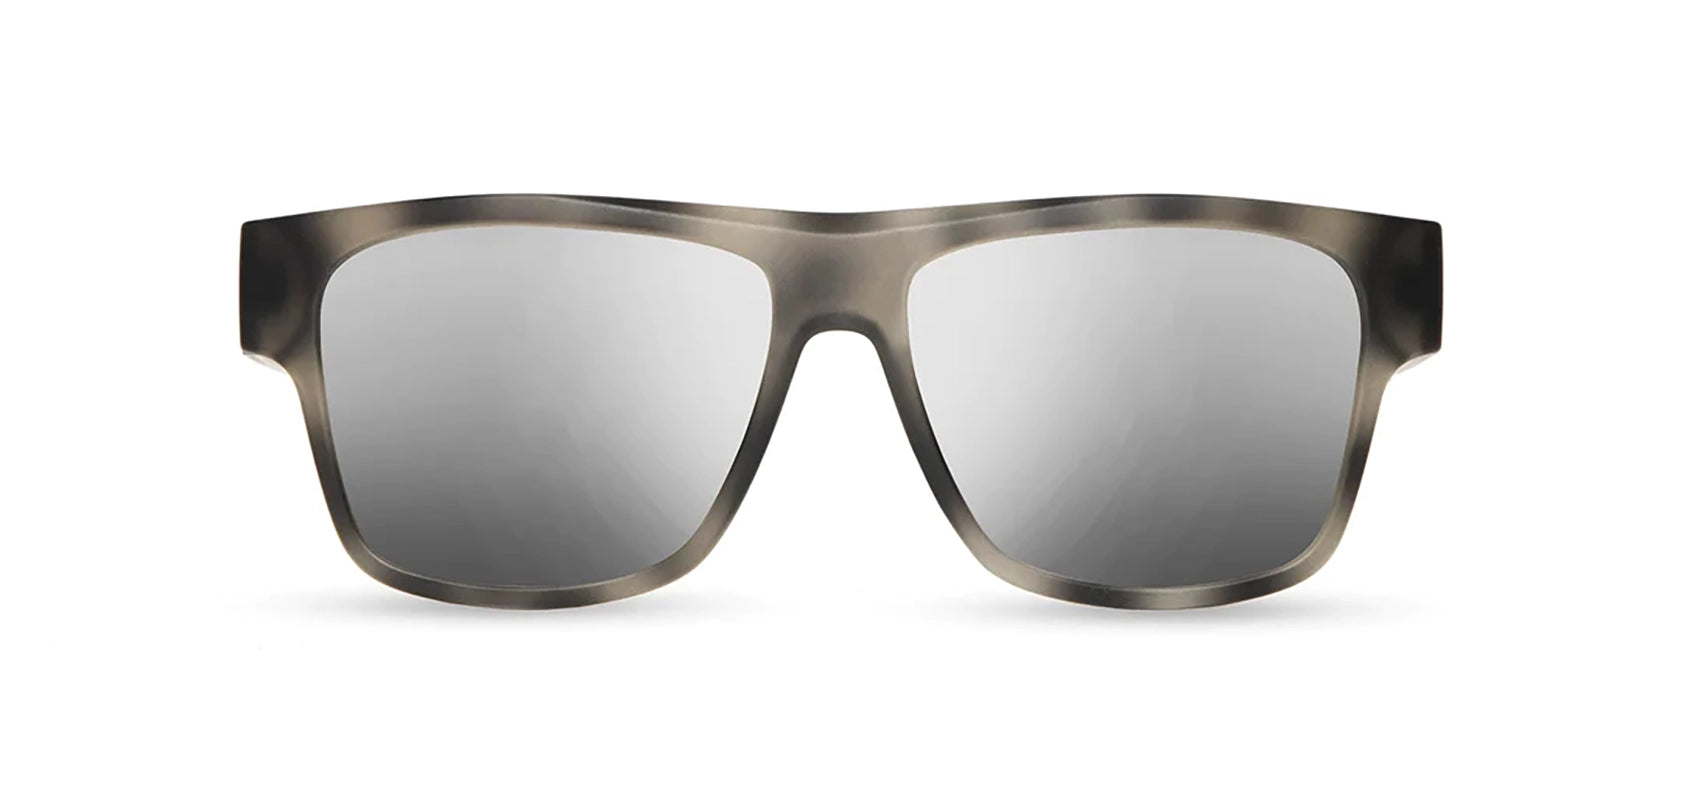 Shwood Camp- Cliff Sunglasses in Matte Grey Pearl / Walnut frames with Silver mirror polarized lenses, front  view